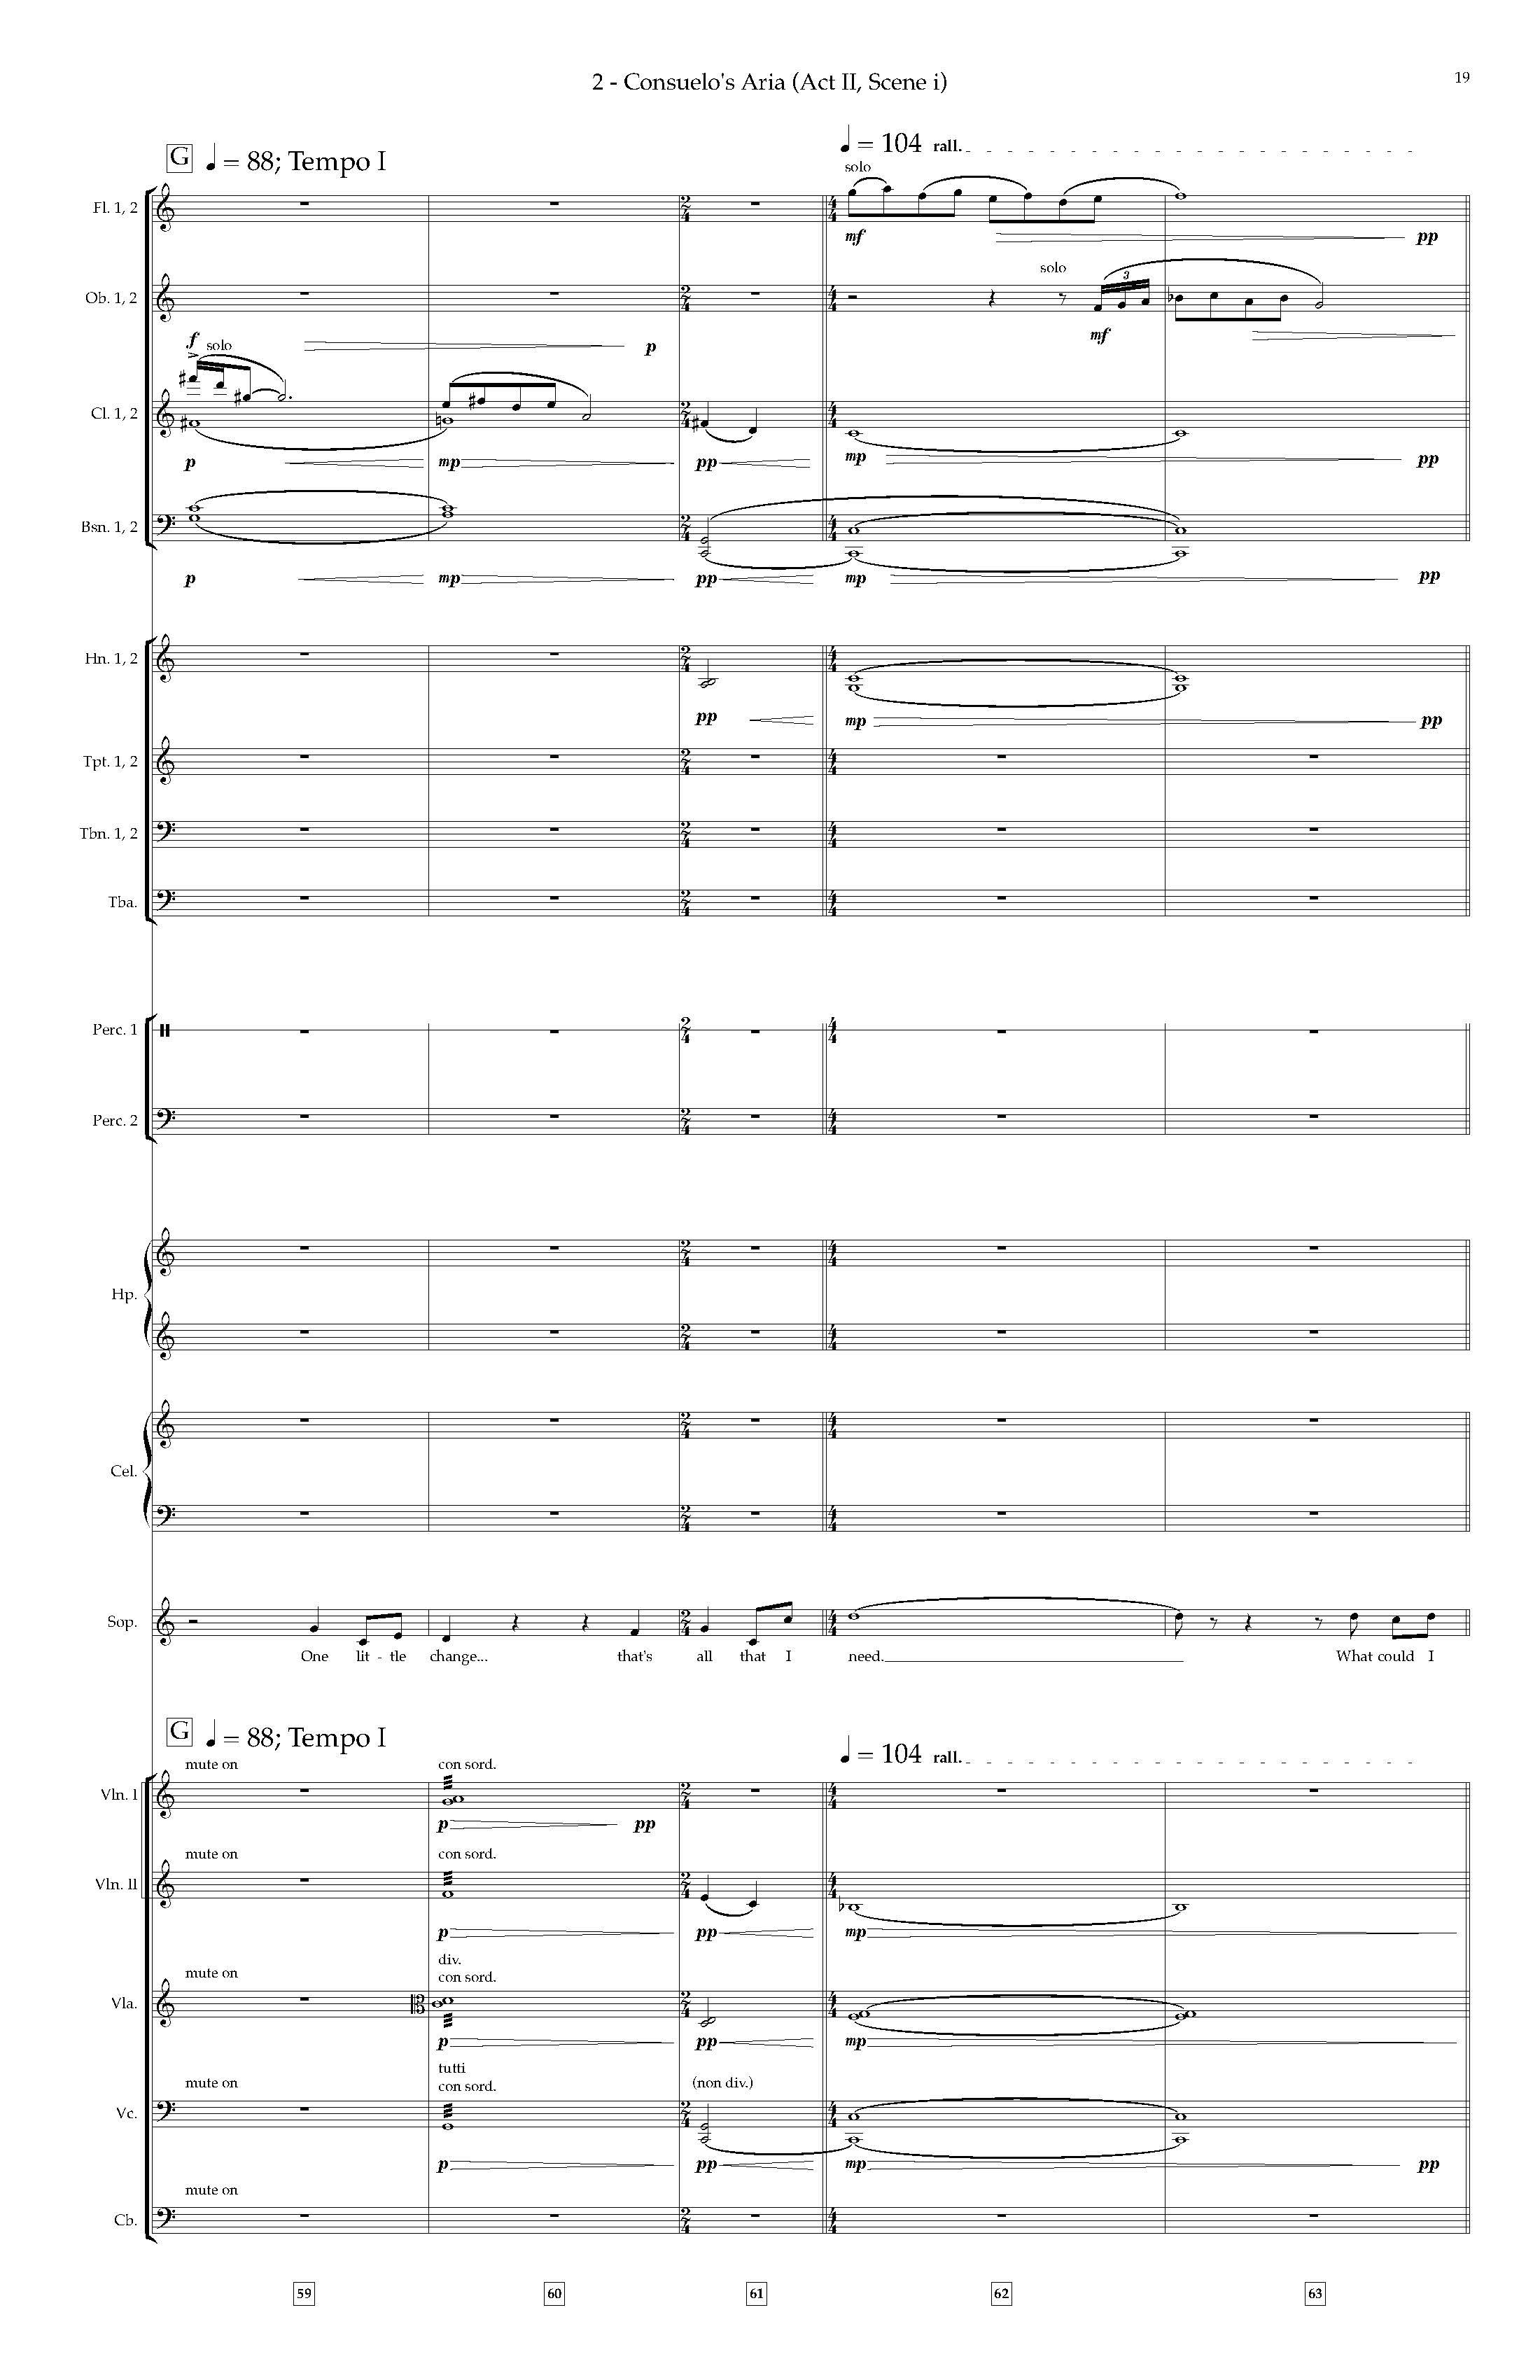 Arias and Interludes from HWGS - Complete Score_Page_25.jpg